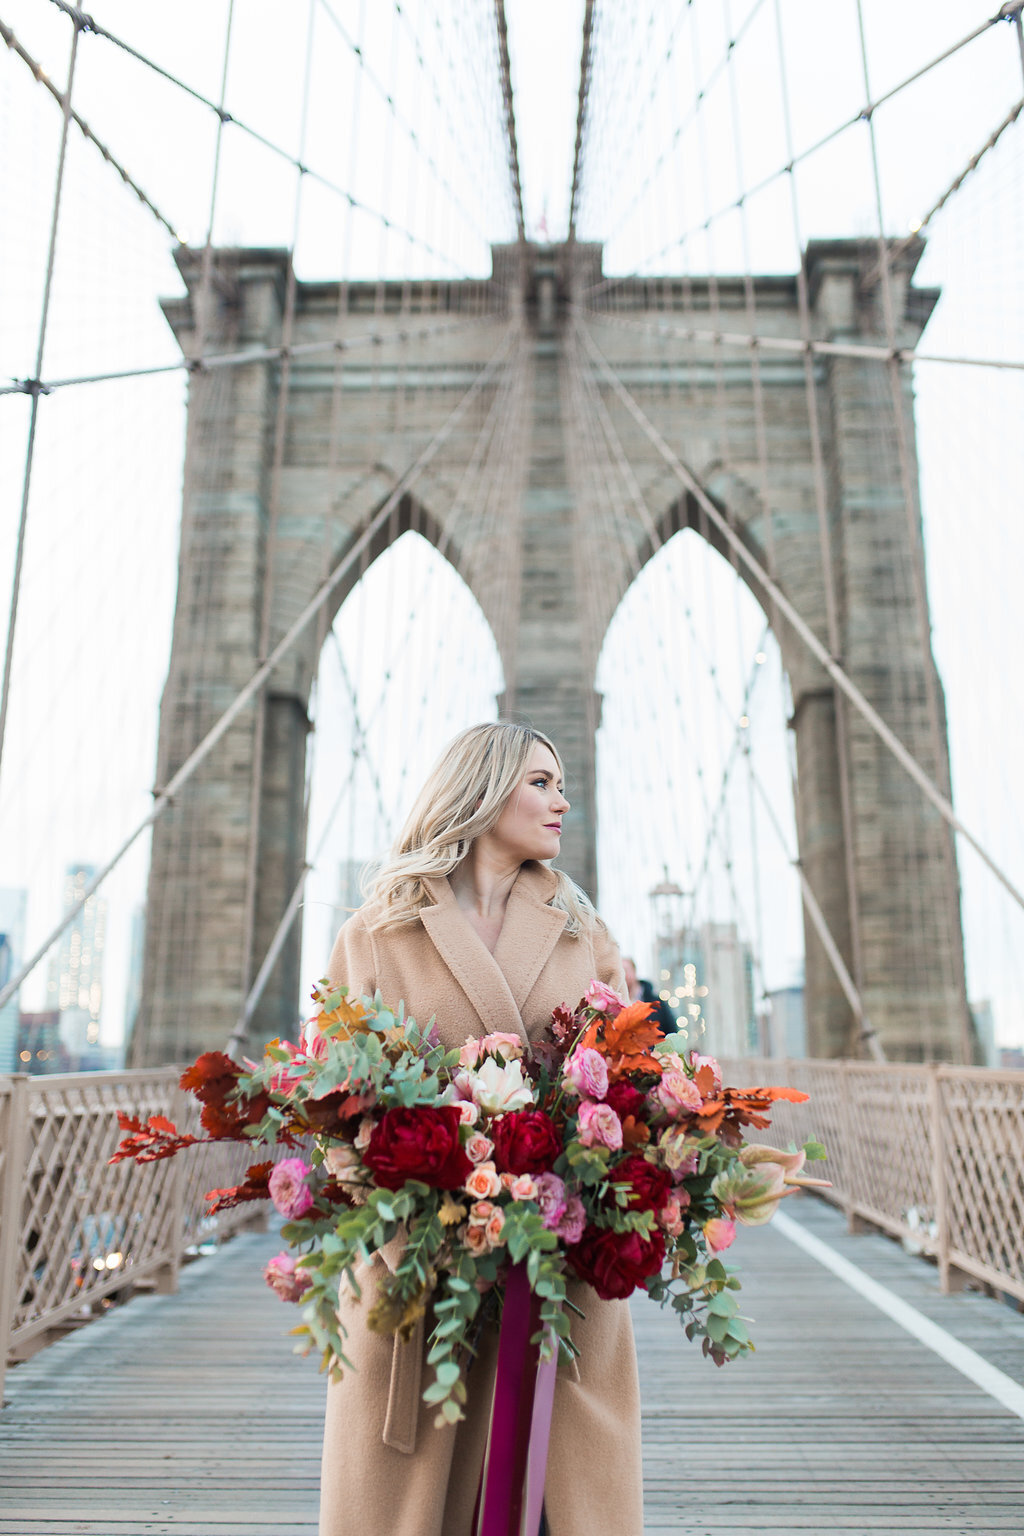 Brittany Frid carries a very large Autumn inspired floral bouquet while standing in front of the Brooklyn Bridge in New York